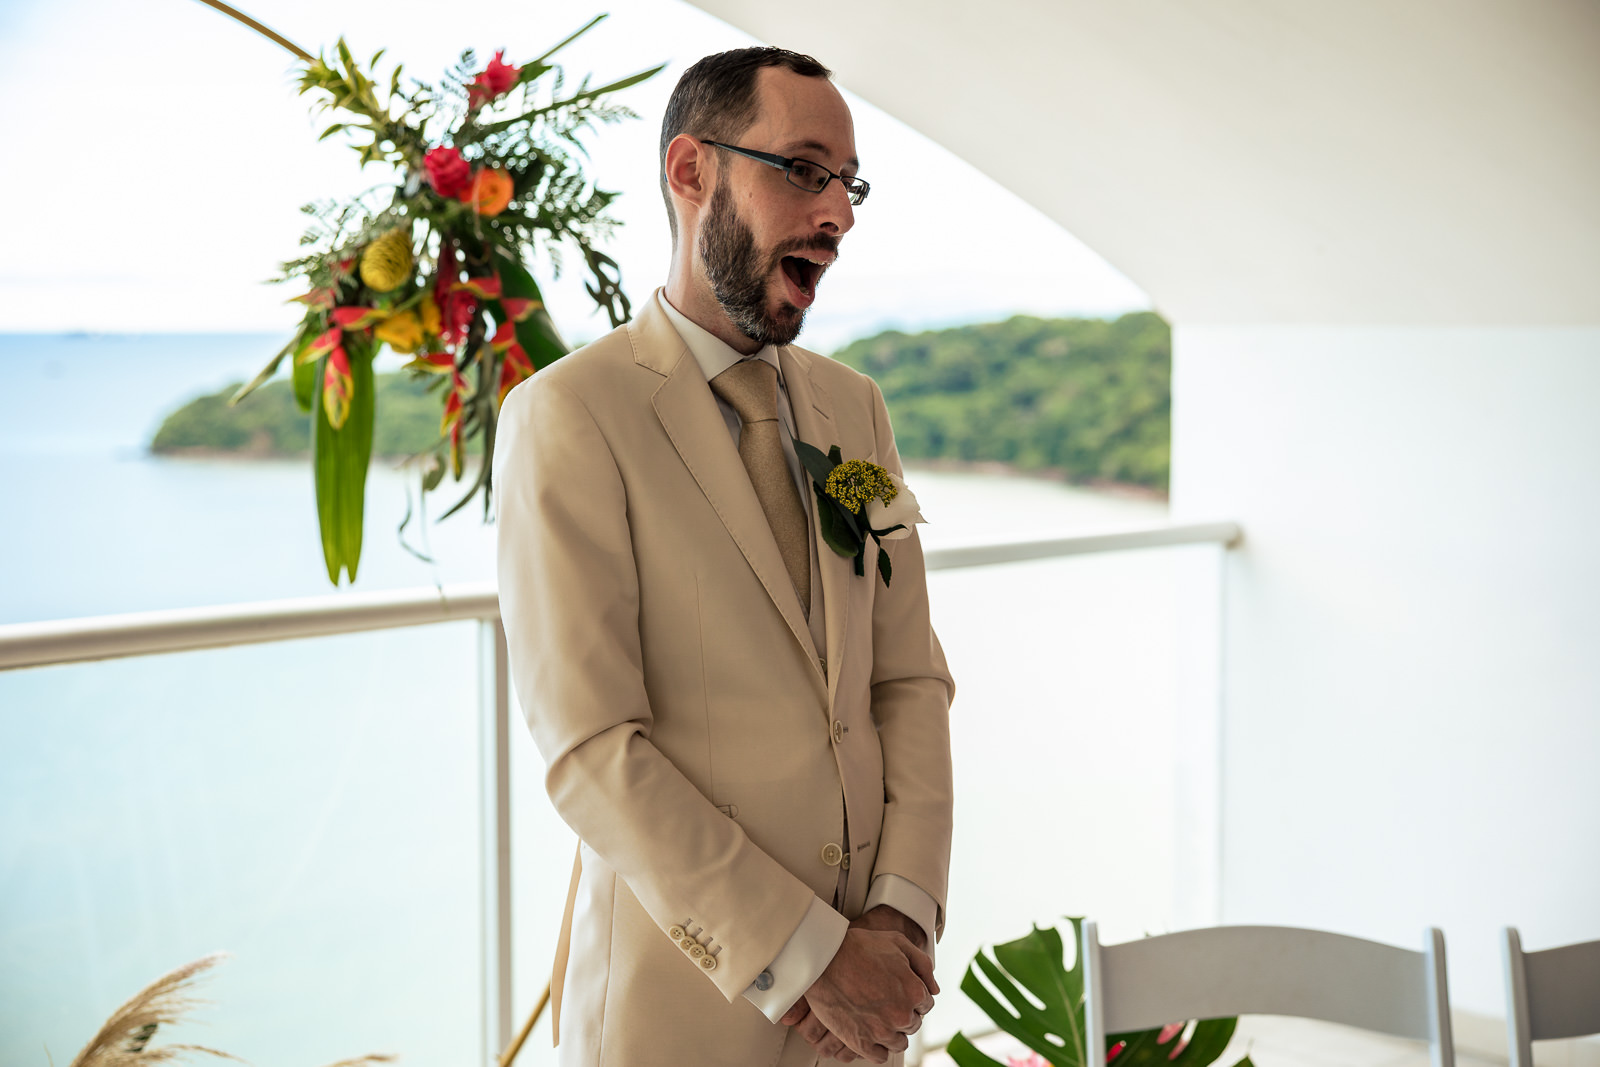 Destination wedding photographer Panama grooms reaction when he sees bride walking down the isle